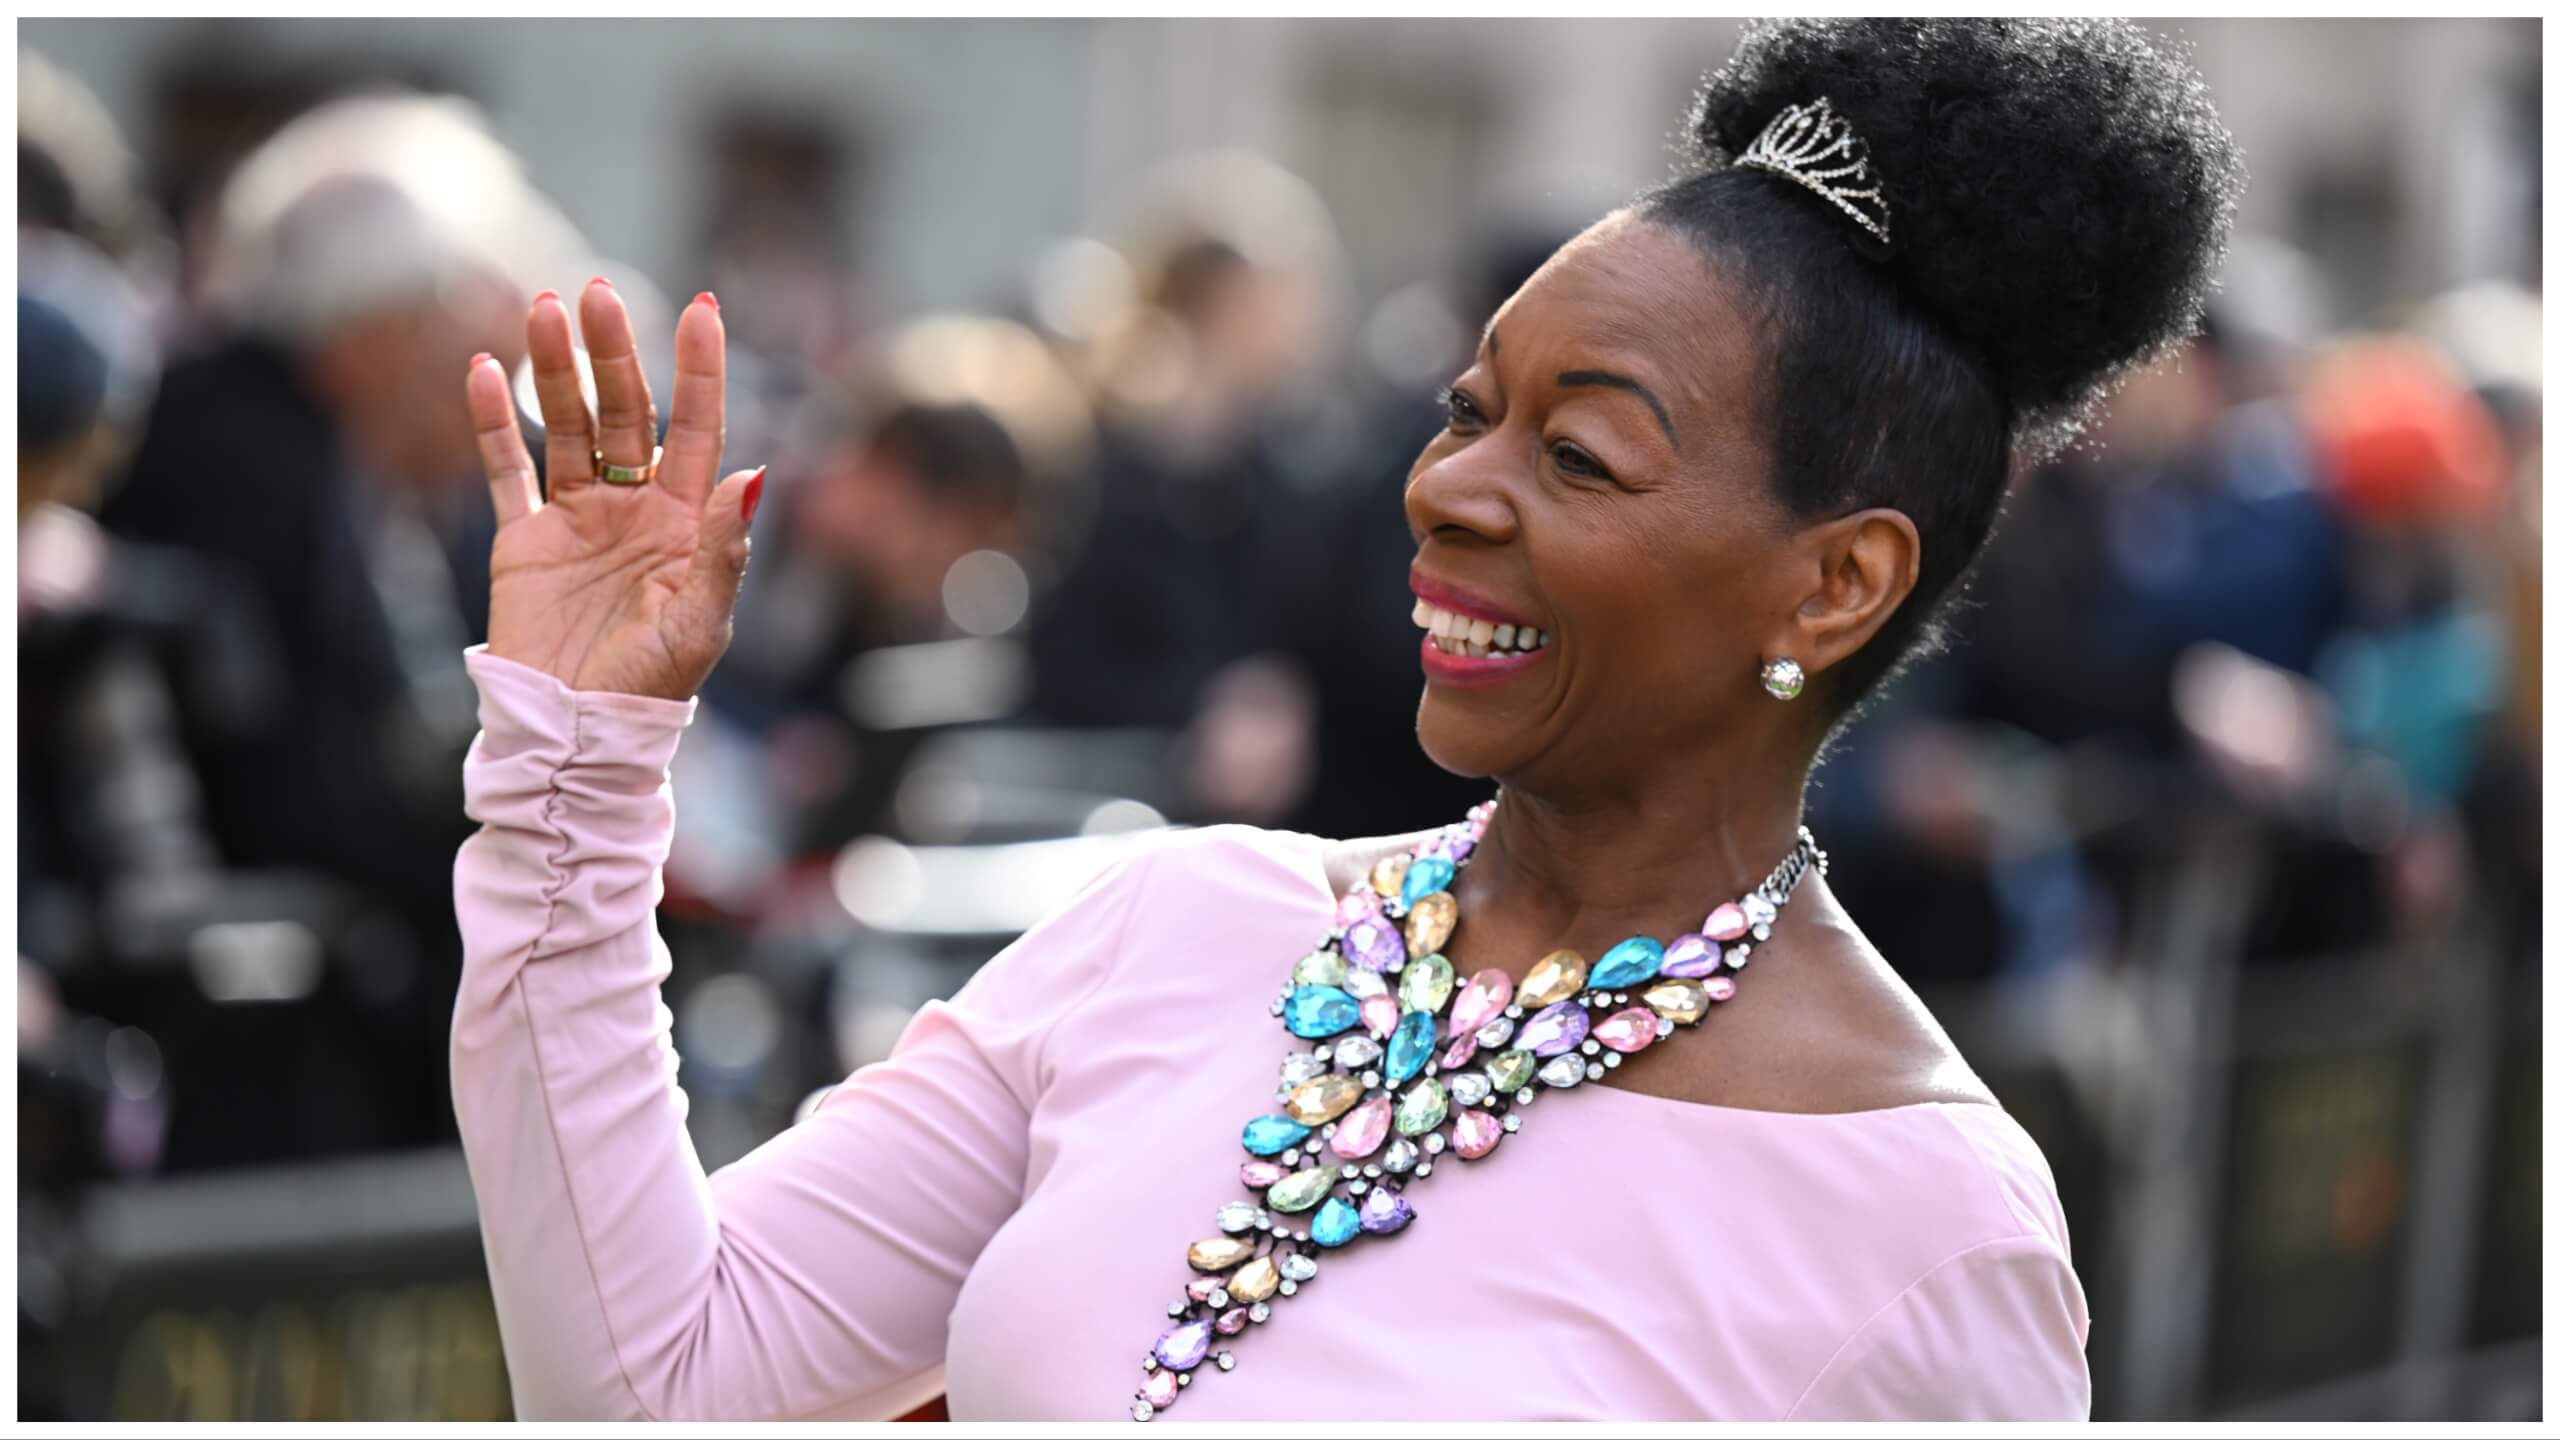 Baroness Floella Benjamin shared details of coronation rehearsals and a Buckingham Palace surprise in a tweet.